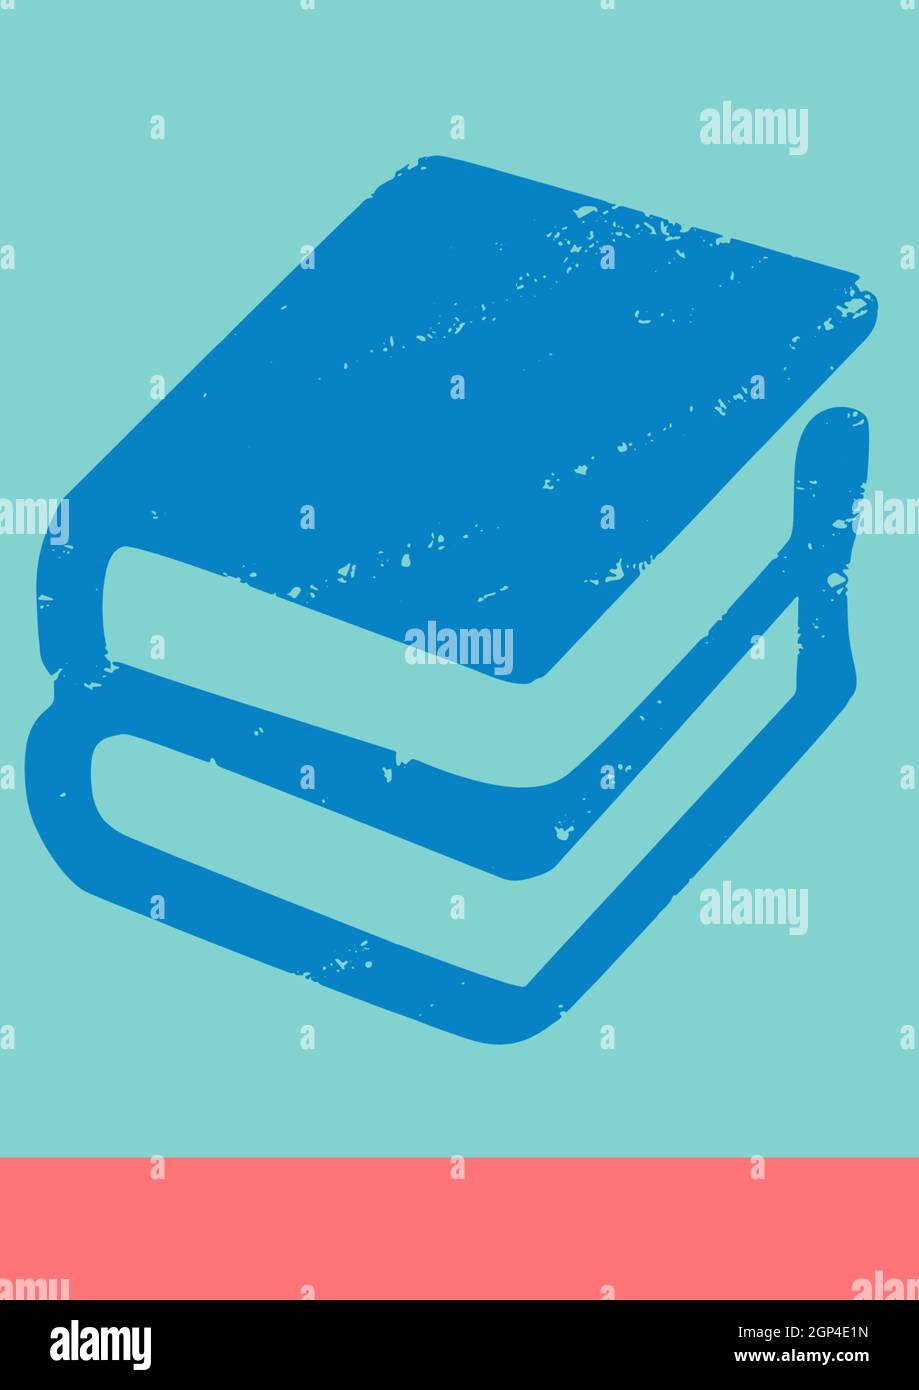 Composition of blue book icons on green background Stock Photo